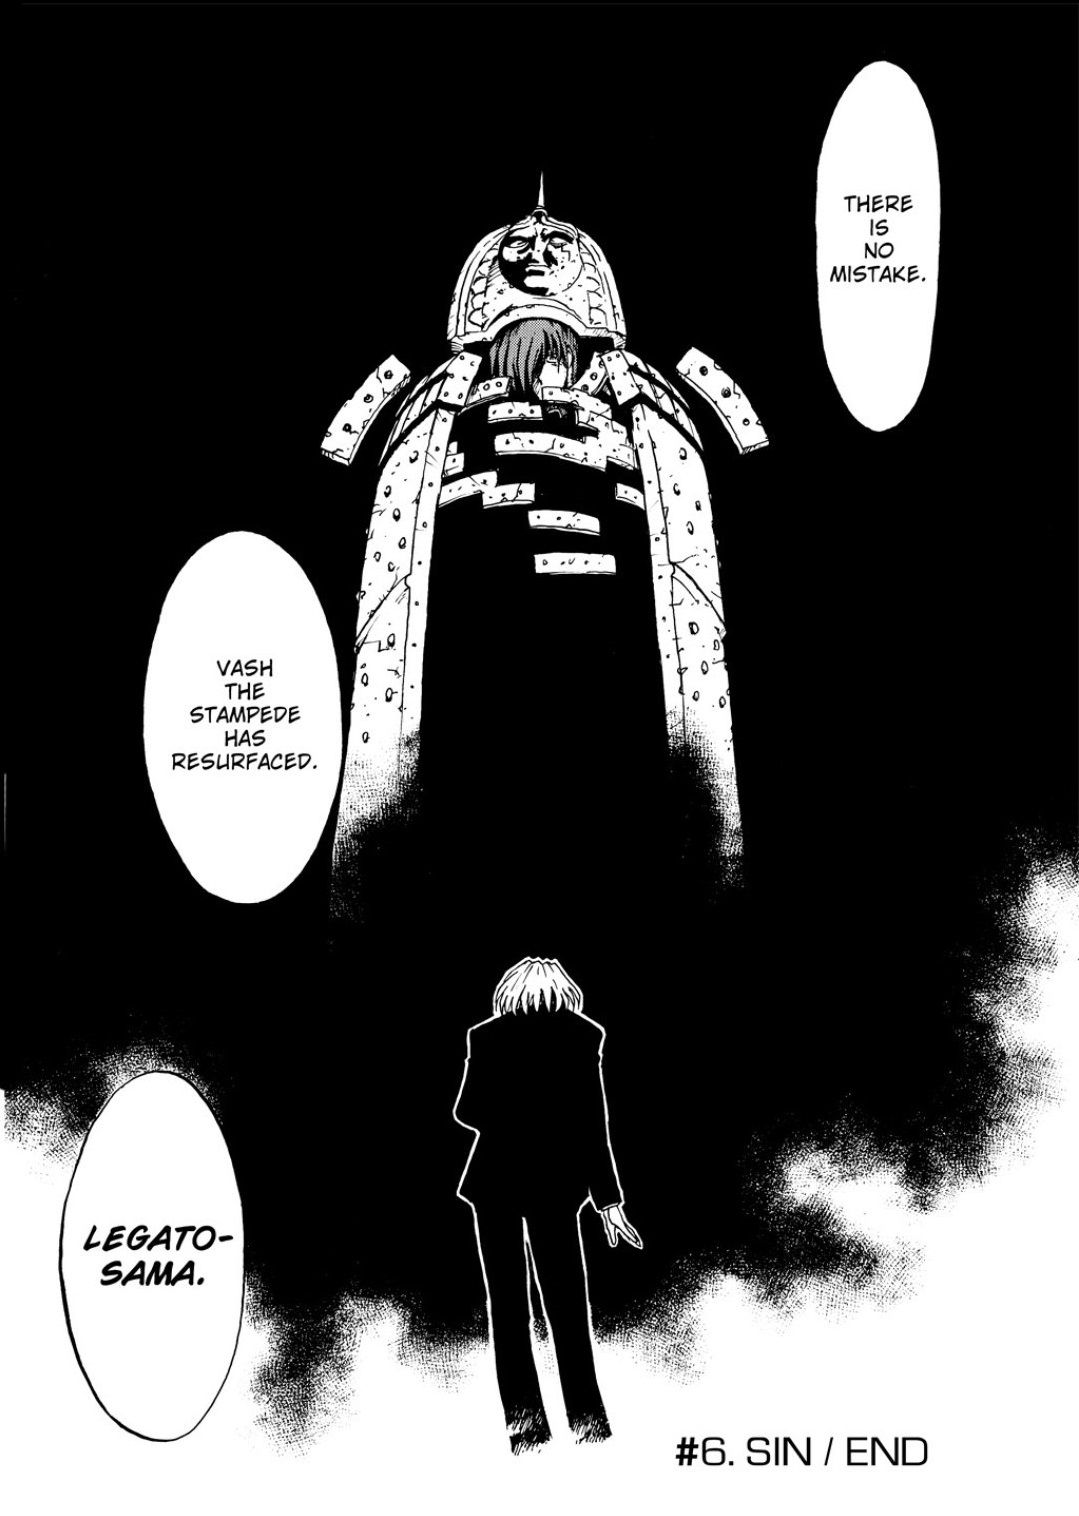 A full-page panel from the final issue of Trigun Maximum issue #6, “Sin,” showing the back of an anime character in a dark suit speaking to a shadowy figure encased in a coffin-like apparatus.